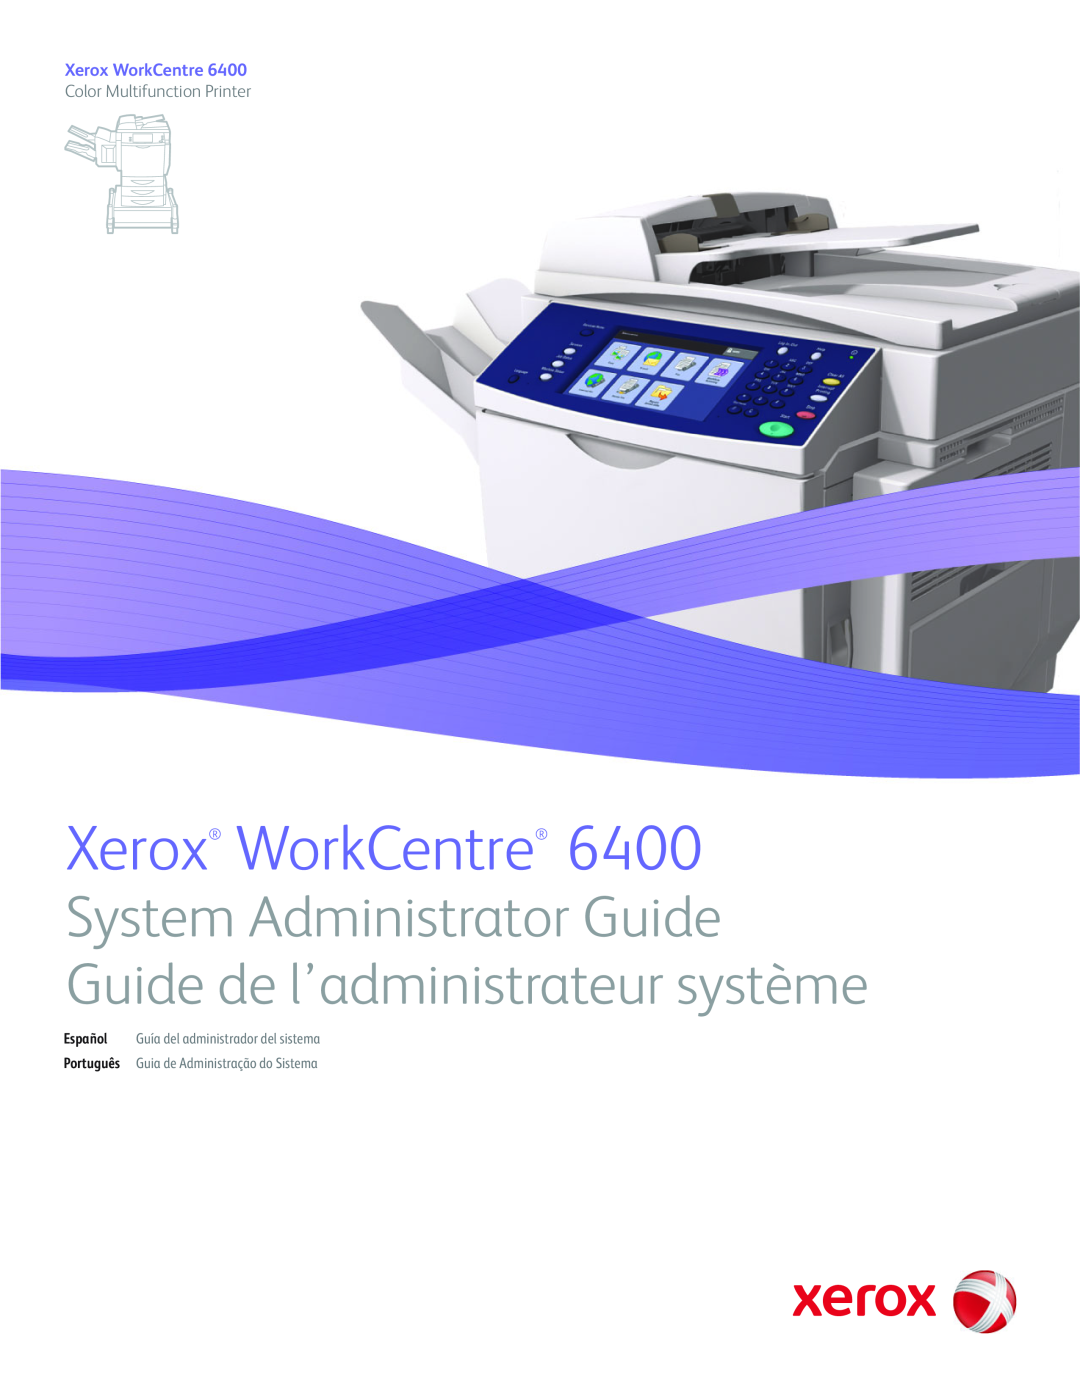 Xerox specifications Scan photos, slides and negatives, with one touch, bitColor 6400x3200 dpi USB 2.0 Hi-Speed 